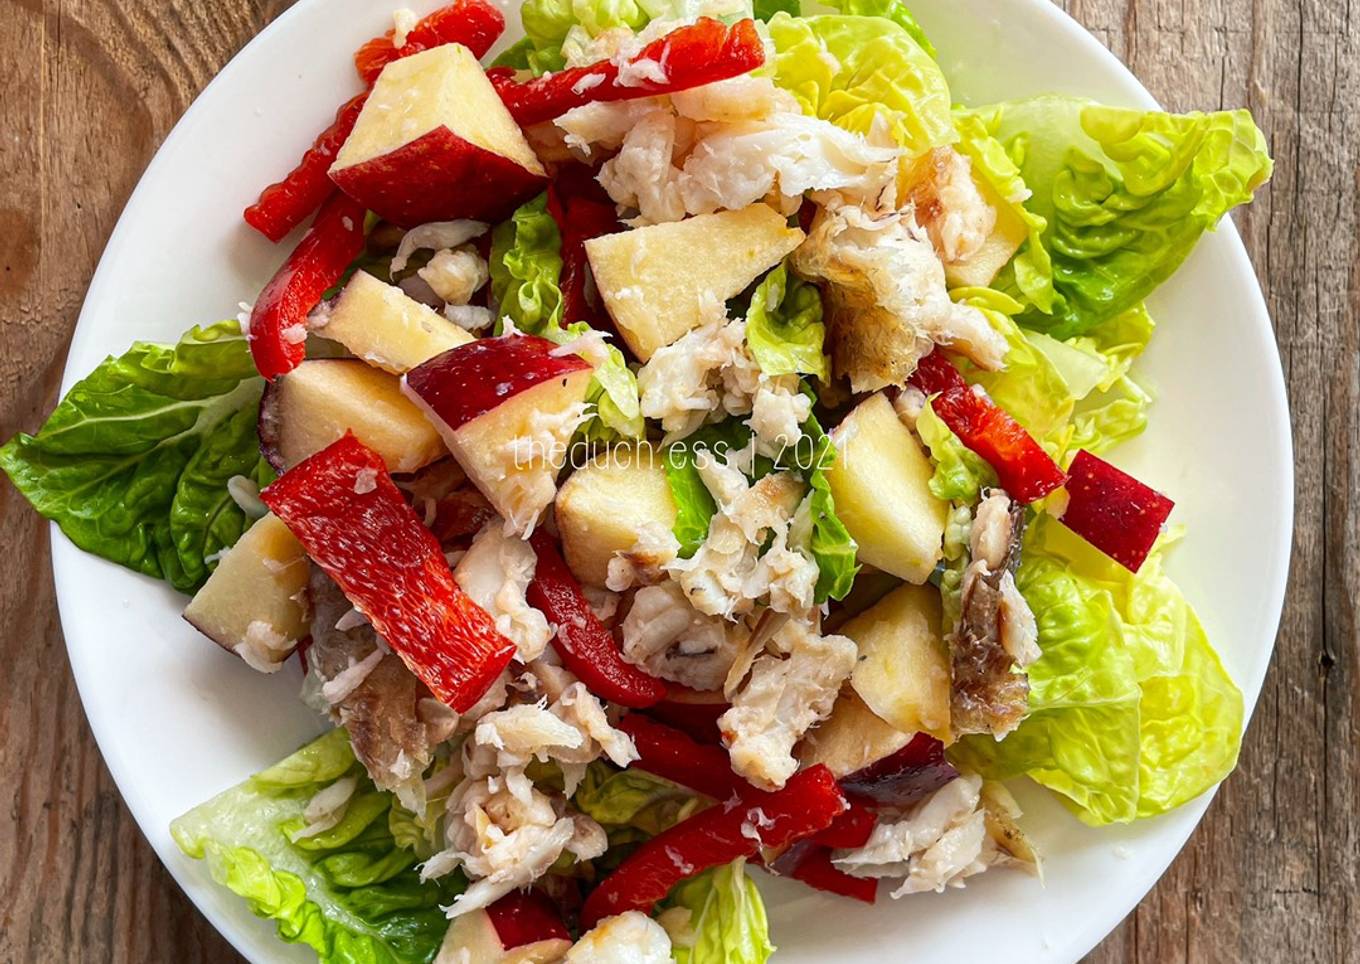 Crisp Salad with Baked Fish